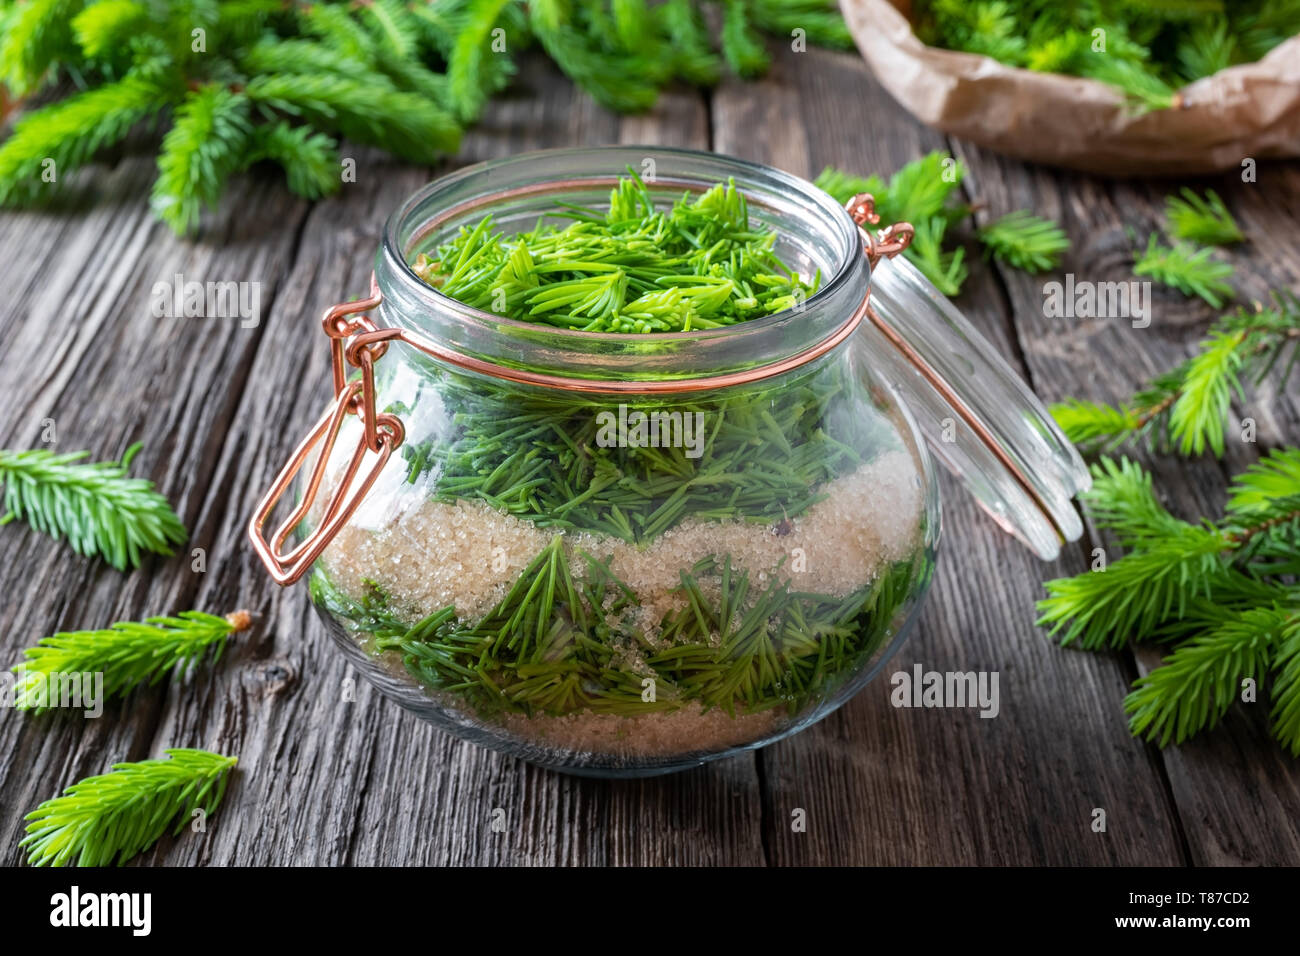 Preparation of herbal syrup against cough from young spruce tips and cane sugar Stock Photo